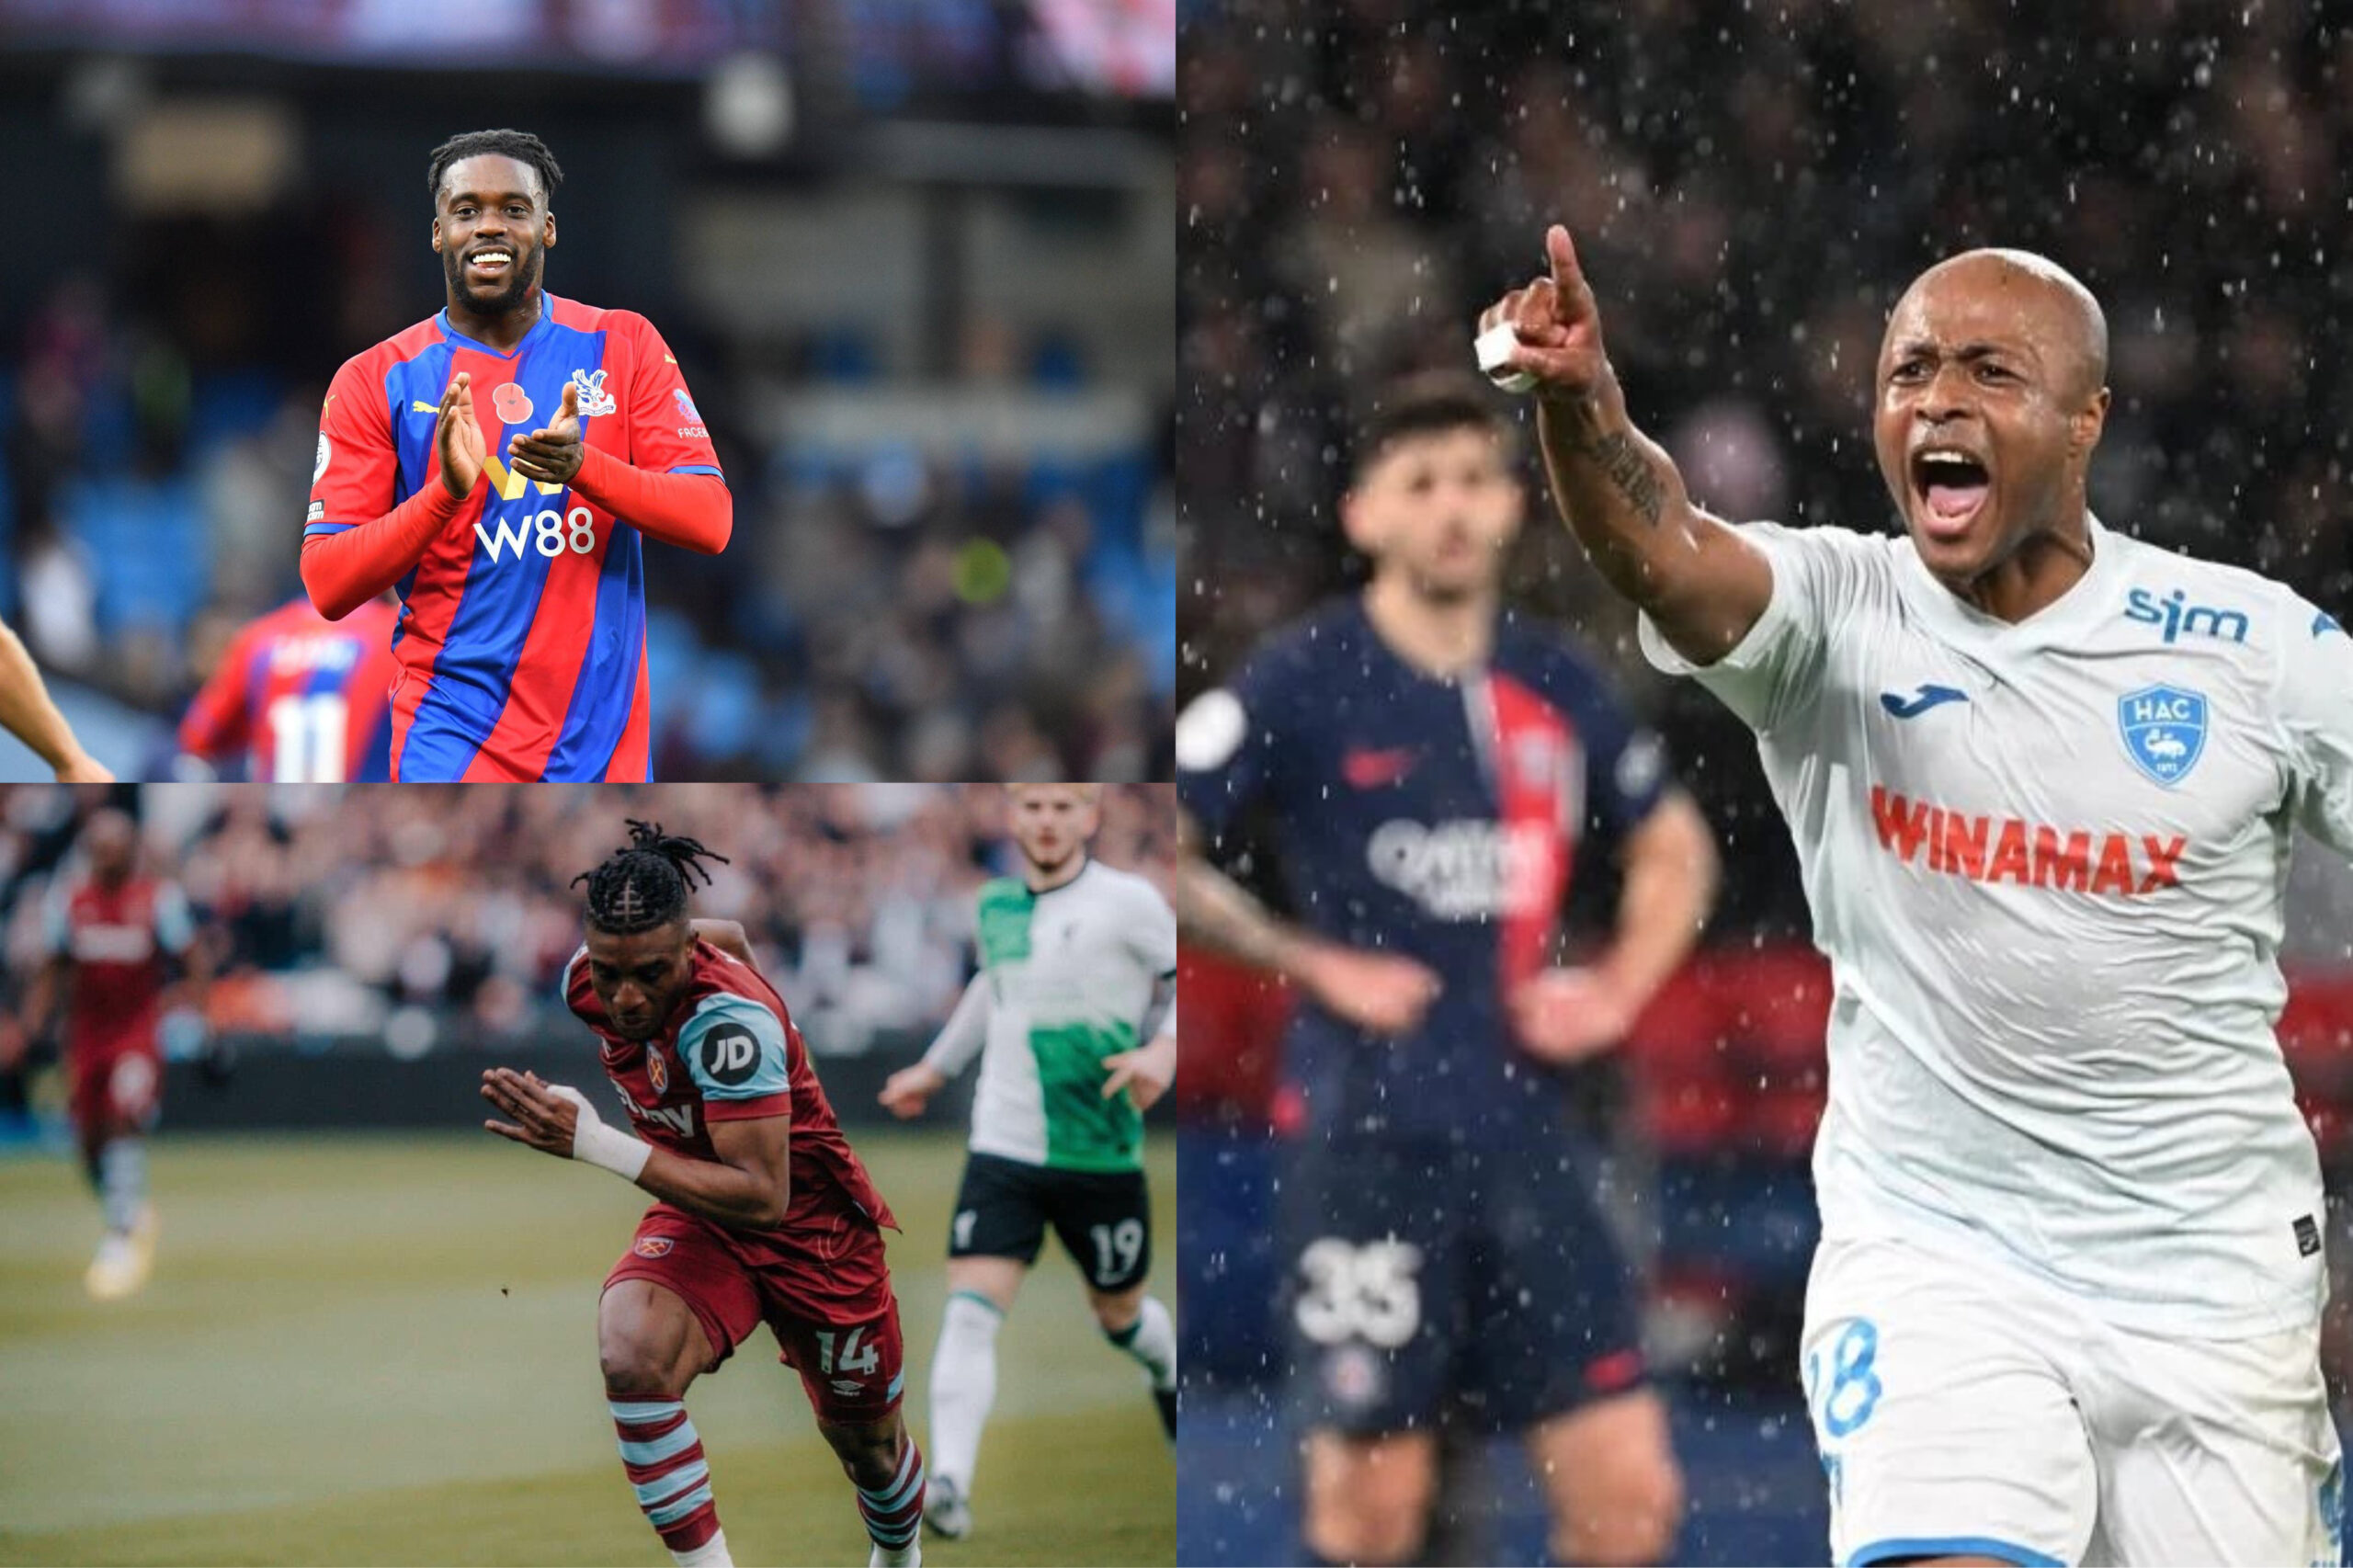 Ghanaian players abroad: Andre Ayew, Jeffrey Schlupp score as Mohammed Kudus provides assist